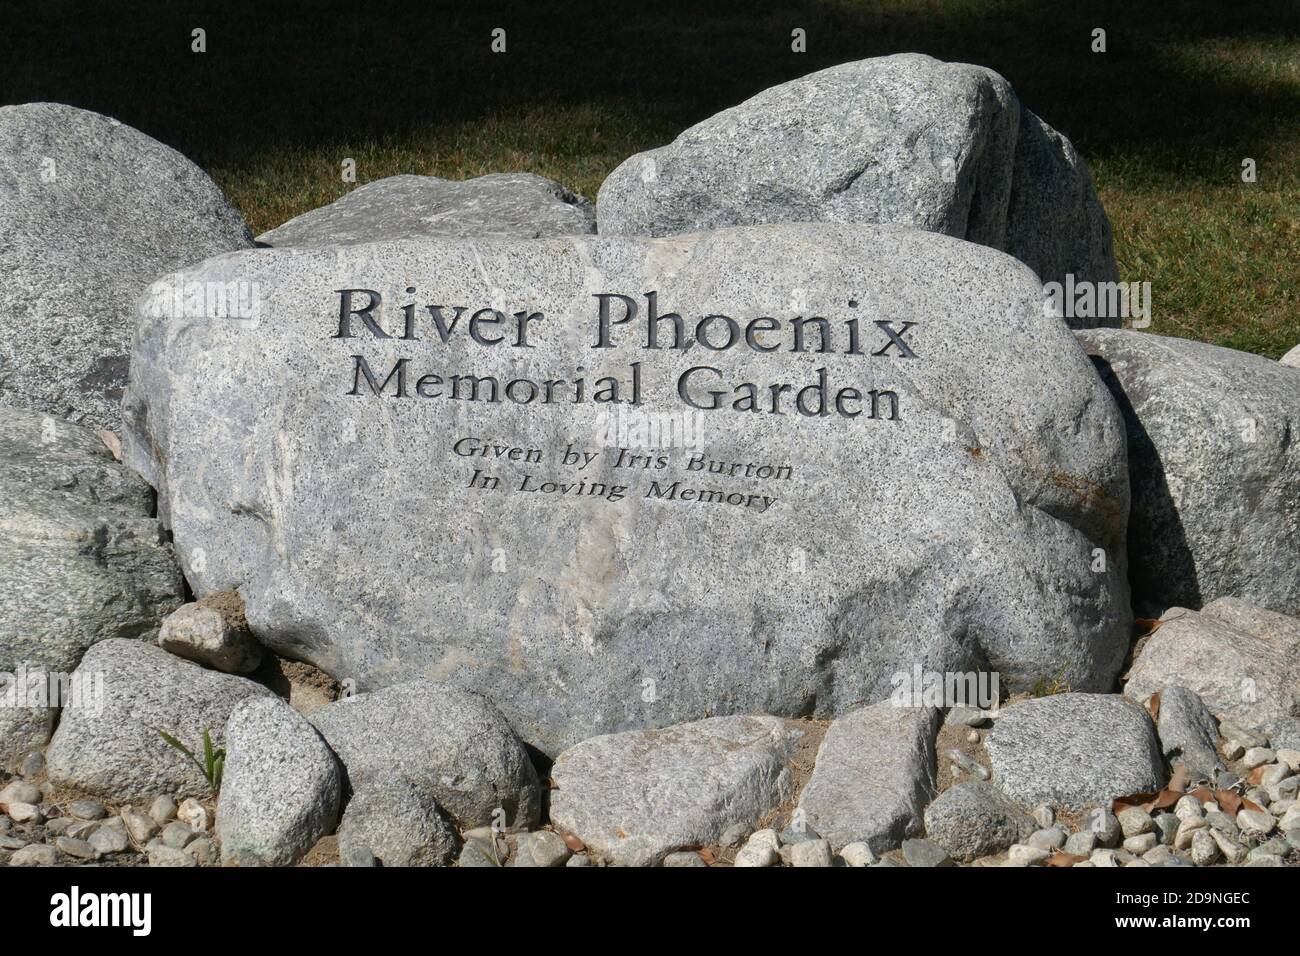 Arcadia, California, USA 4th November 2020 A general view of atmosphere of The River Phoenix Memorial Garden at The Methodist Hospital at 300 W. Huntington Drive on November 4, 2020 in Arcadia, California, USA. Photo by Barry King/Alamy Stock Photo Stock Photo